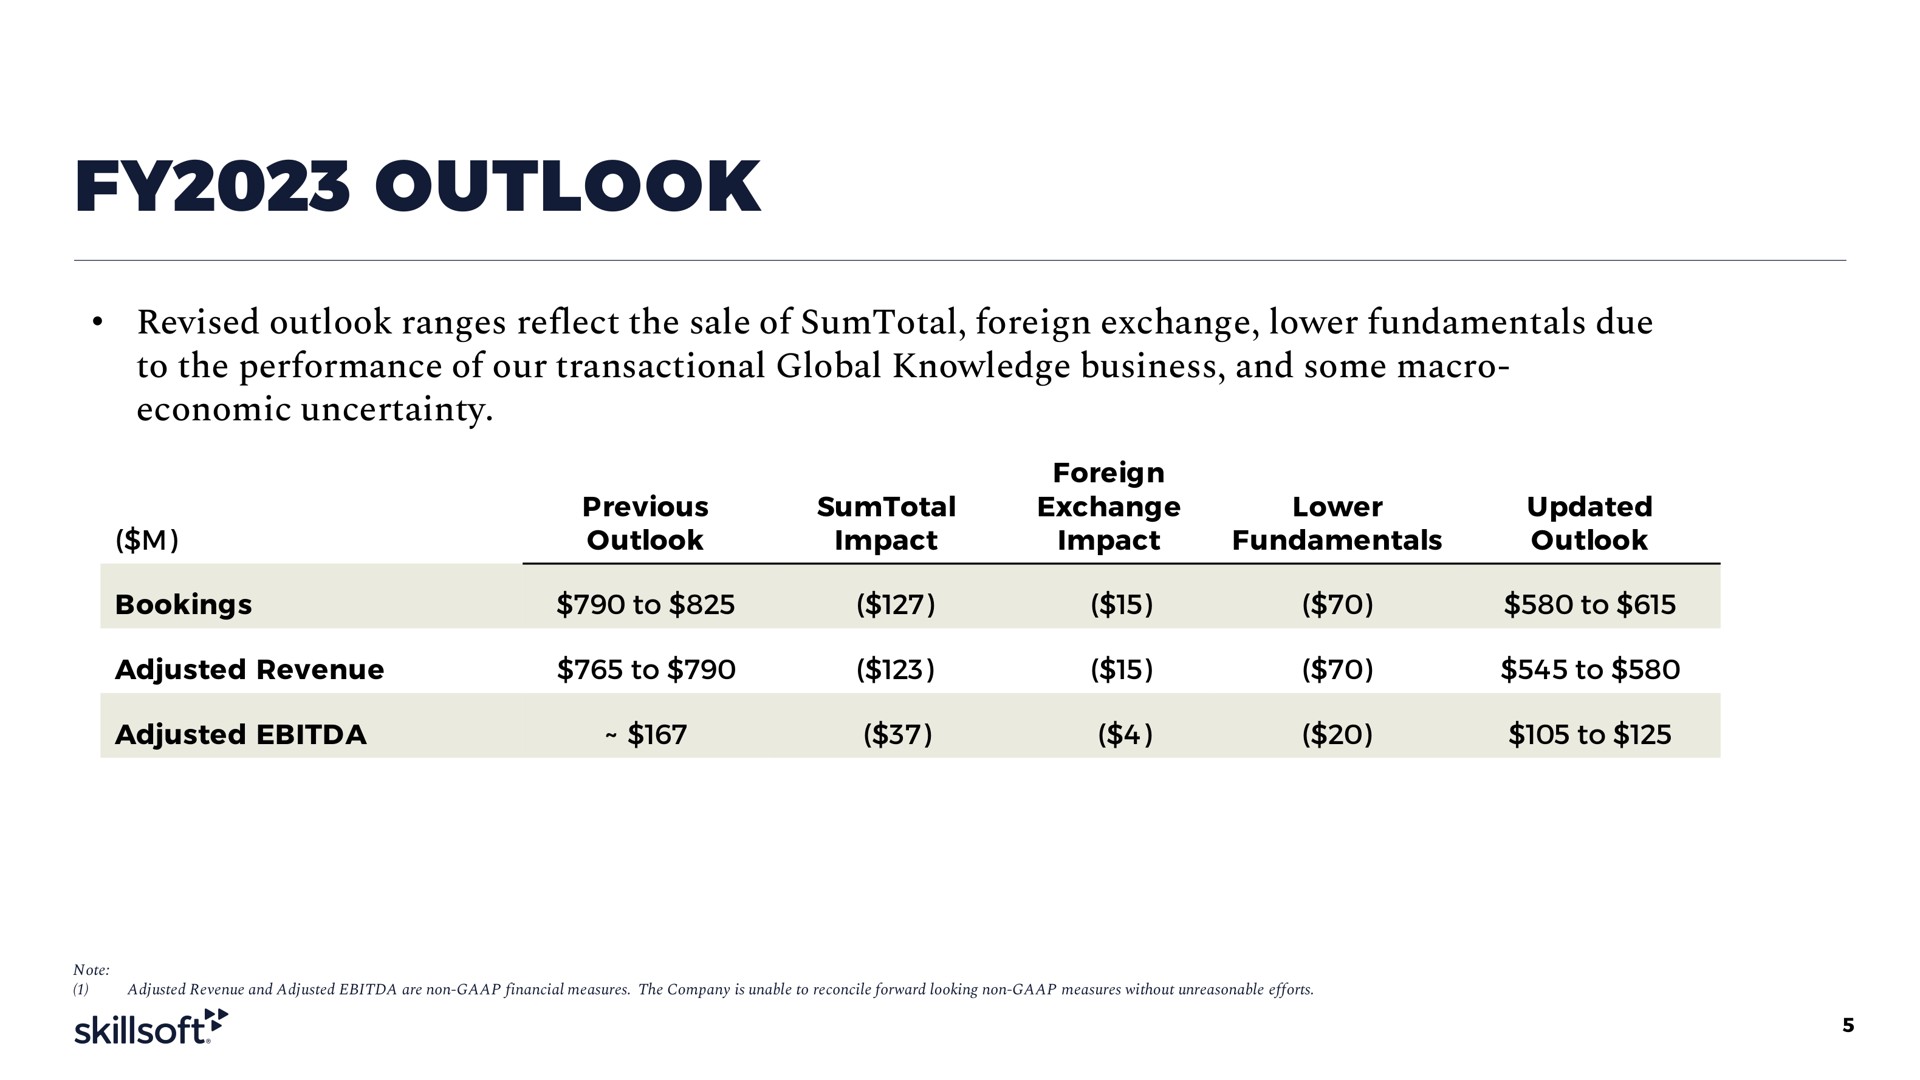 outlook revised outlook ranges reflect the sale of foreign exchange lower fundamentals due to the performance of our transactional global knowledge business and some macro economic uncertainty | Skillsoft